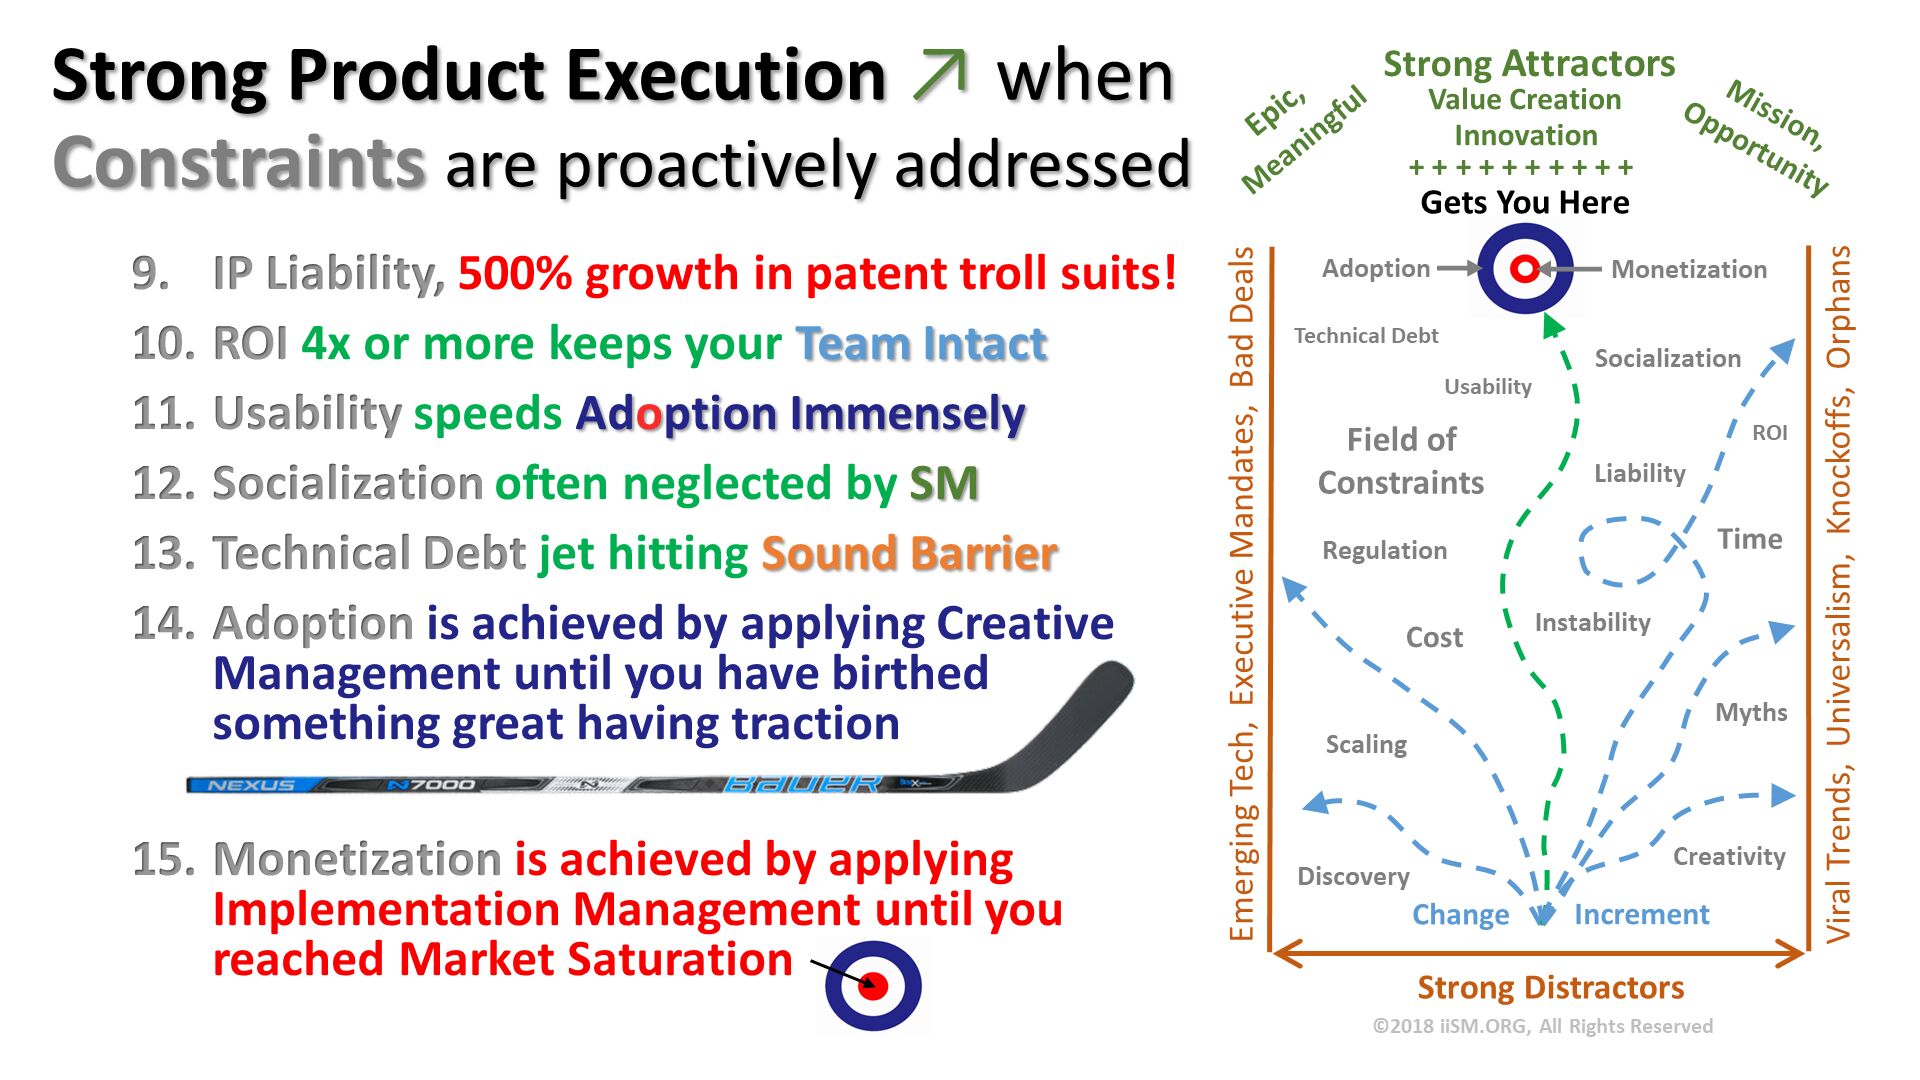 Strong Product Execution ↗ whenConstraints are proactively addressed. IP Liability, 500% growth in patent troll suits!
ROI 4x or more keeps your Team Intact
Usability speeds Adoption Immensely 
Socialization often neglected by SM
Technical Debt jet hitting Sound Barrier
Adoption is achieved by applying Creative Management until you have birthed something great having traction
Monetization is achieved by applying Implementation Management until you reached Market Saturation


. 